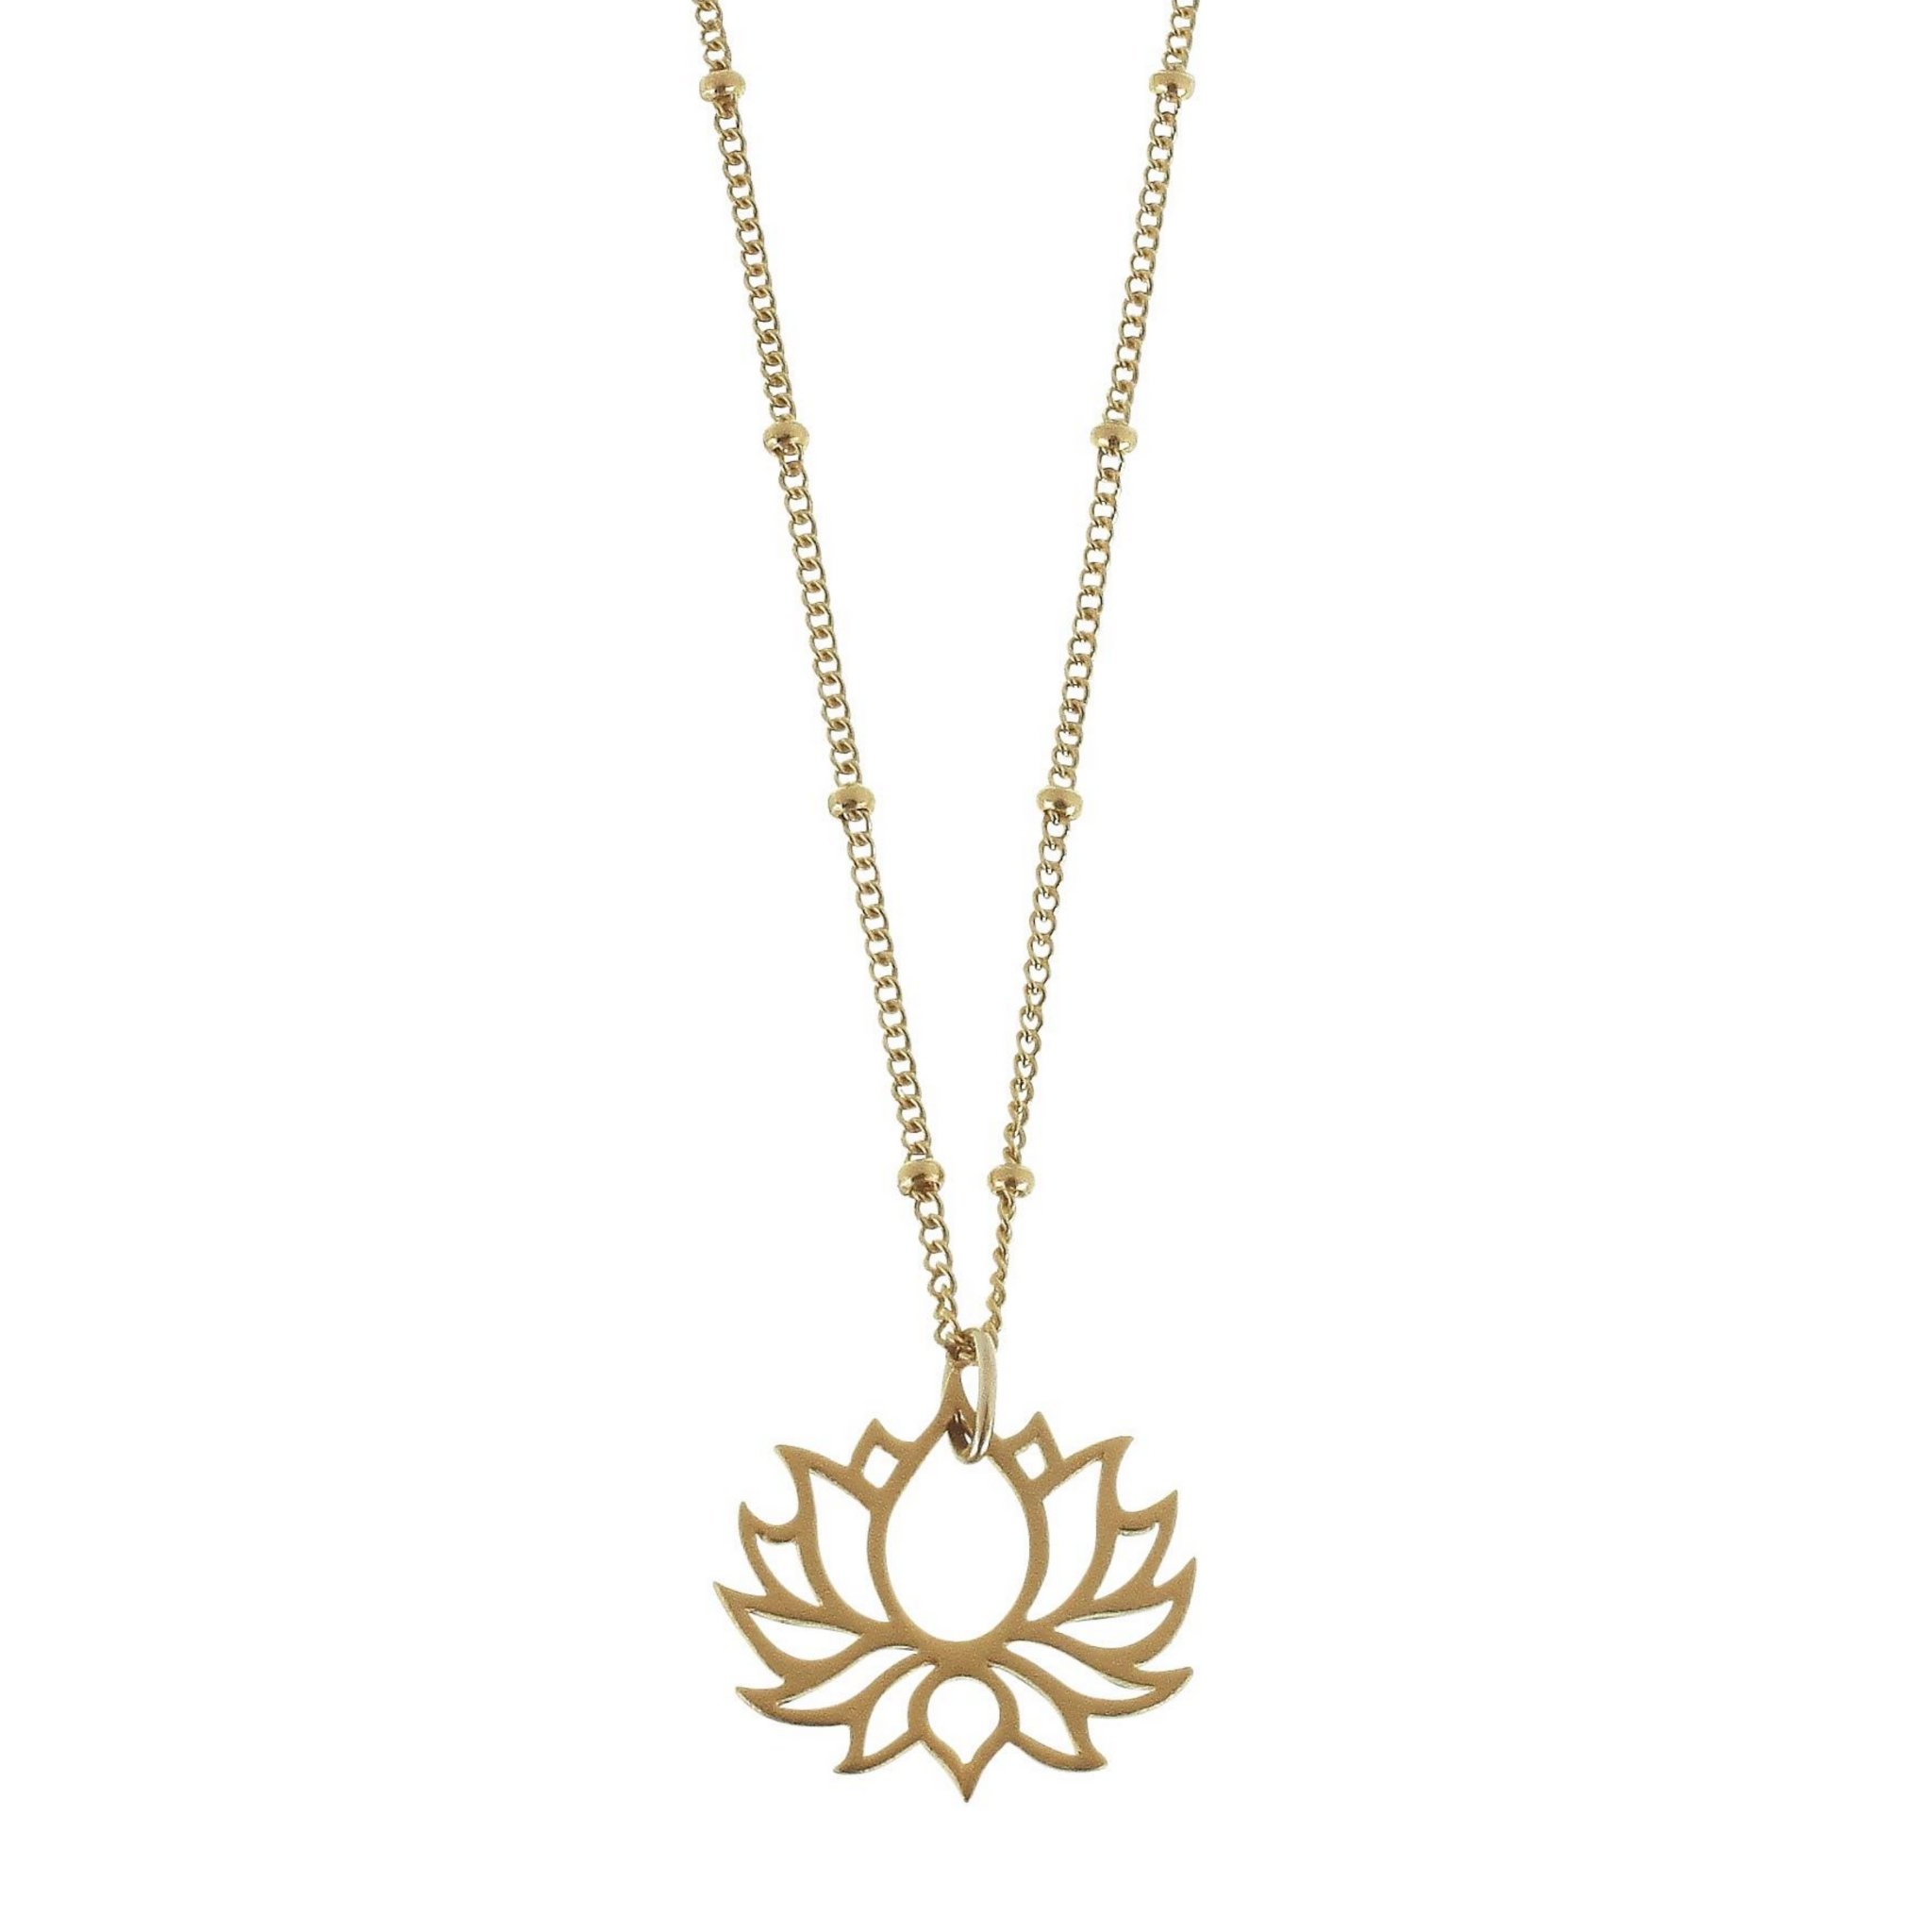 Emergence Gold Plate Lotus Necklace - Jewellery at The Vault NZ - NZ